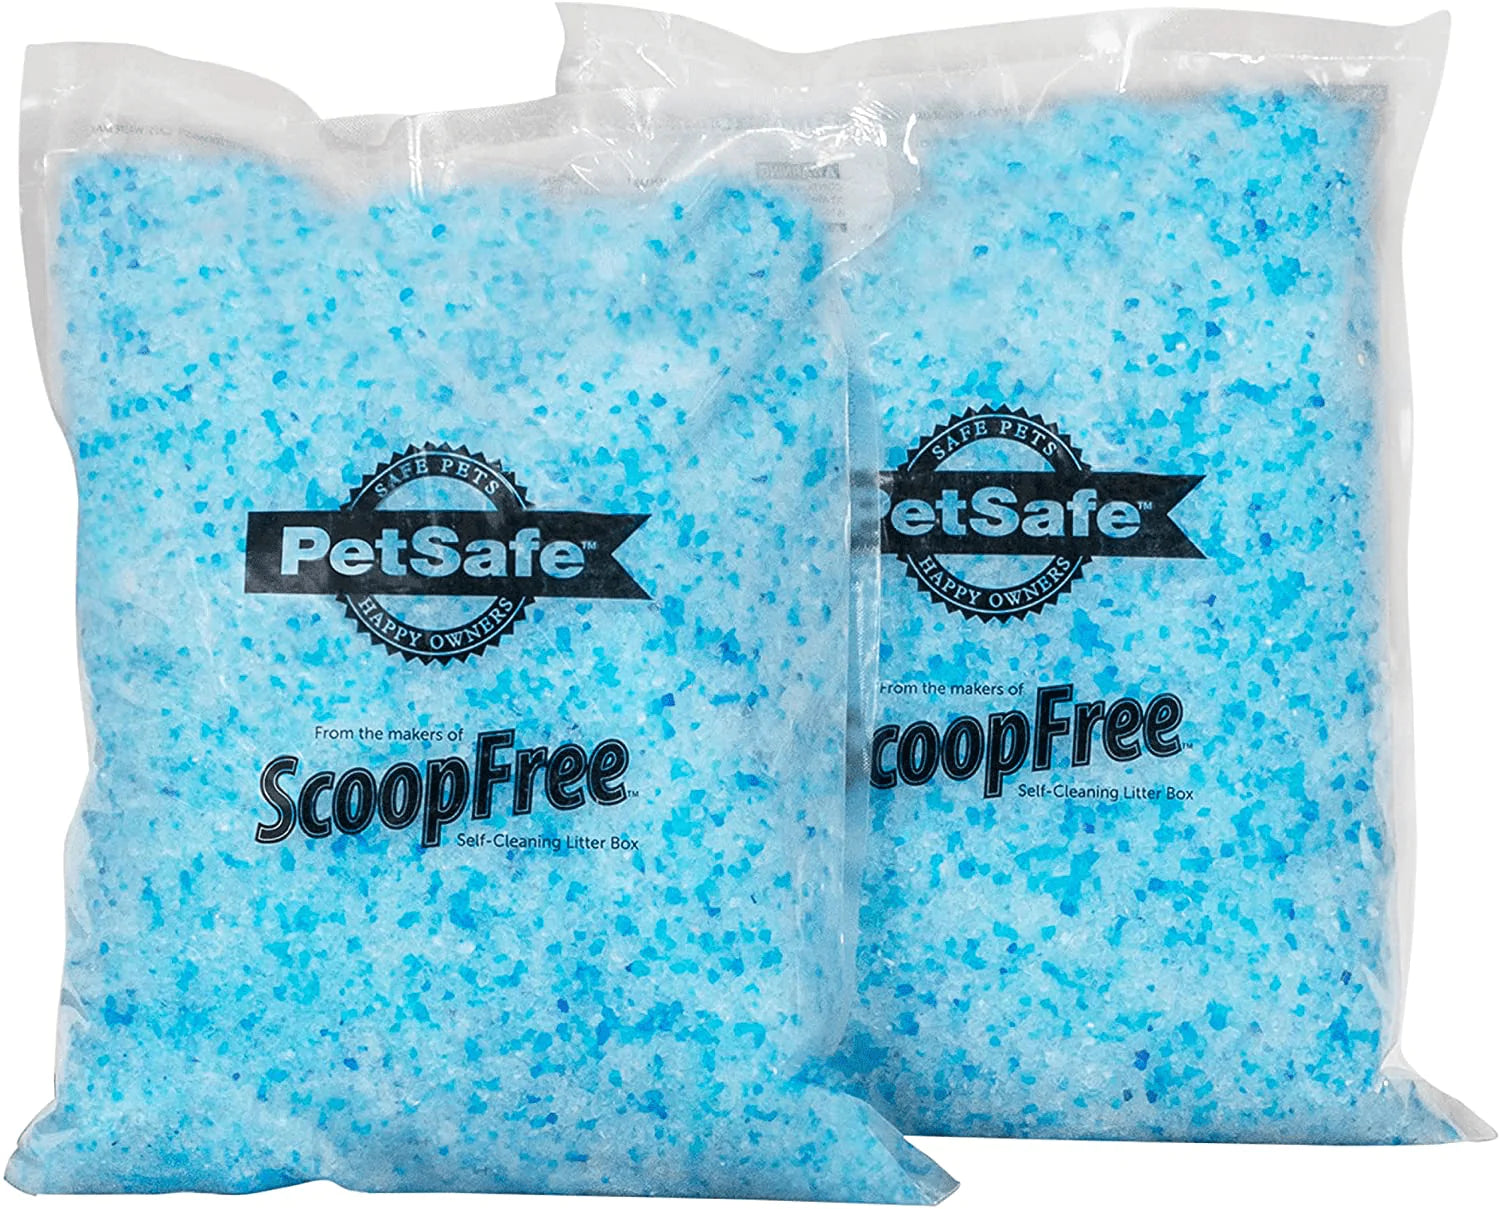 Petsafe Scoopfree Premium Crystal Cat Litter - Includes 2 Bags (4.5 Lb Each) of Litter - Works with Any Traditional Litter Box, Absorbs Faster than Clay Clumping, Low Tracking for Less Mess Animals & Pet Supplies > Pet Supplies > Cat Supplies > Cat Litter Waste Management Blue  